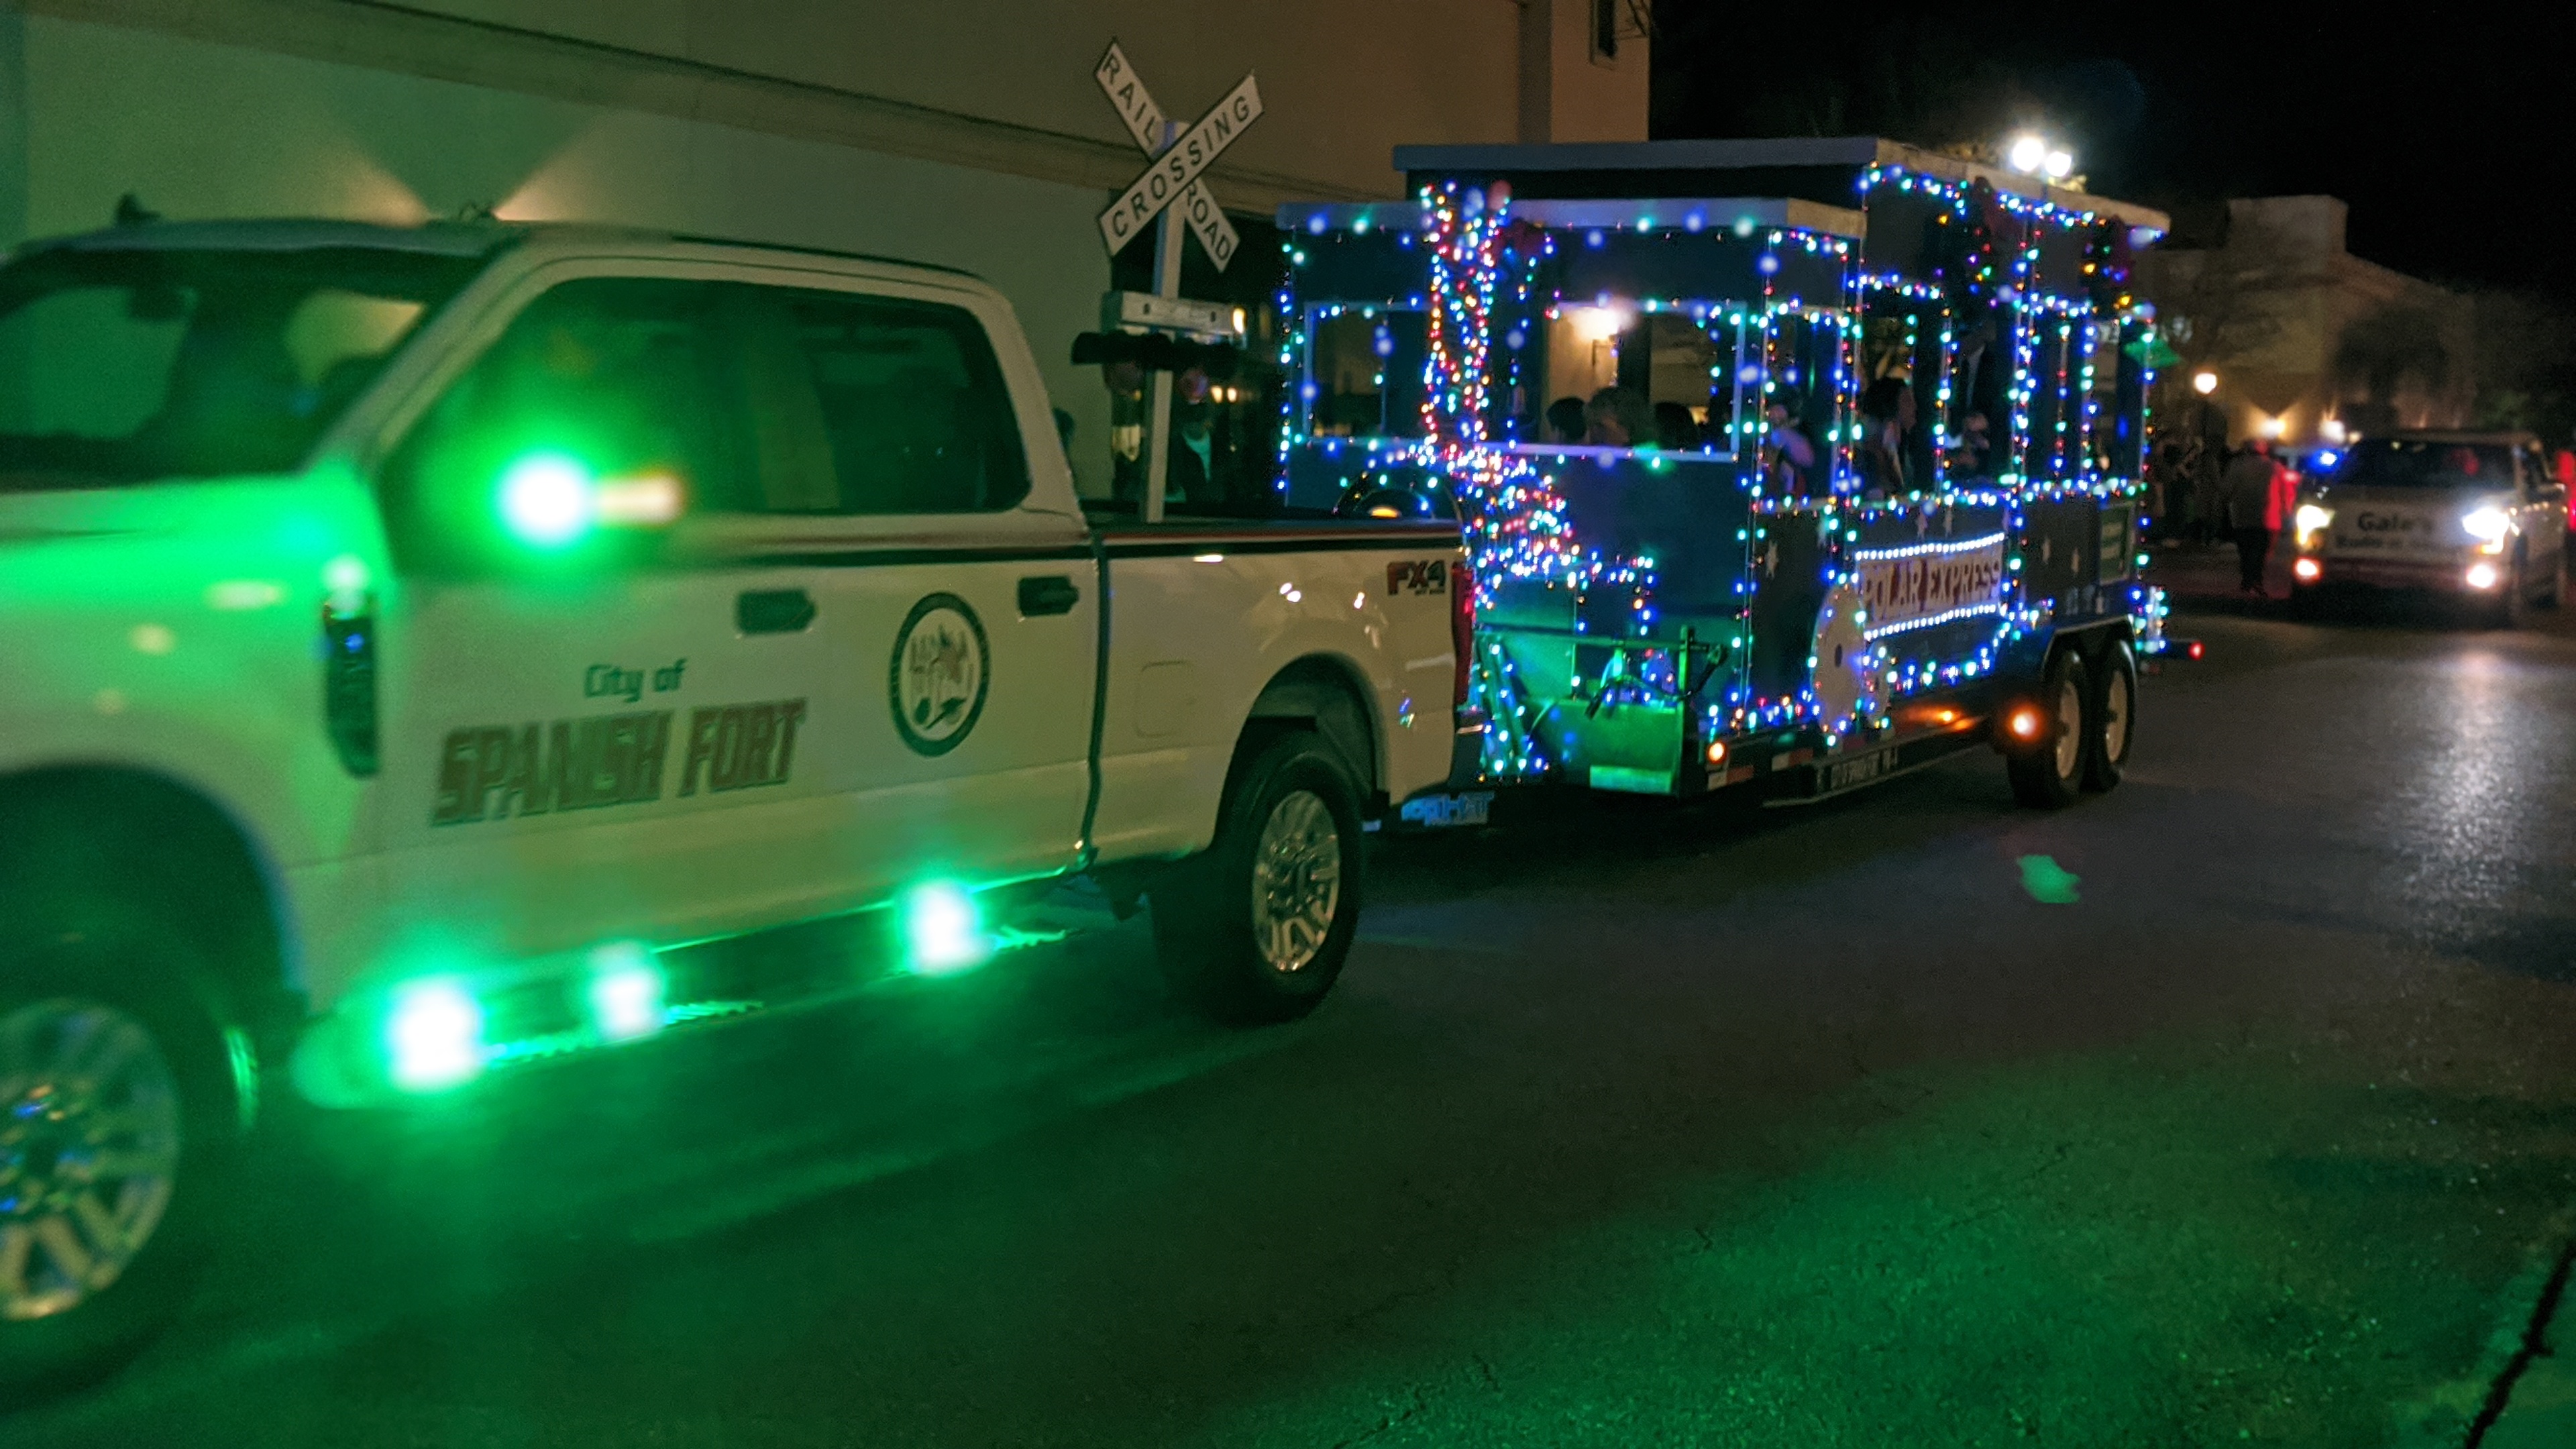 City of Spanish Fort's "The Spirit of Christmas" Parade